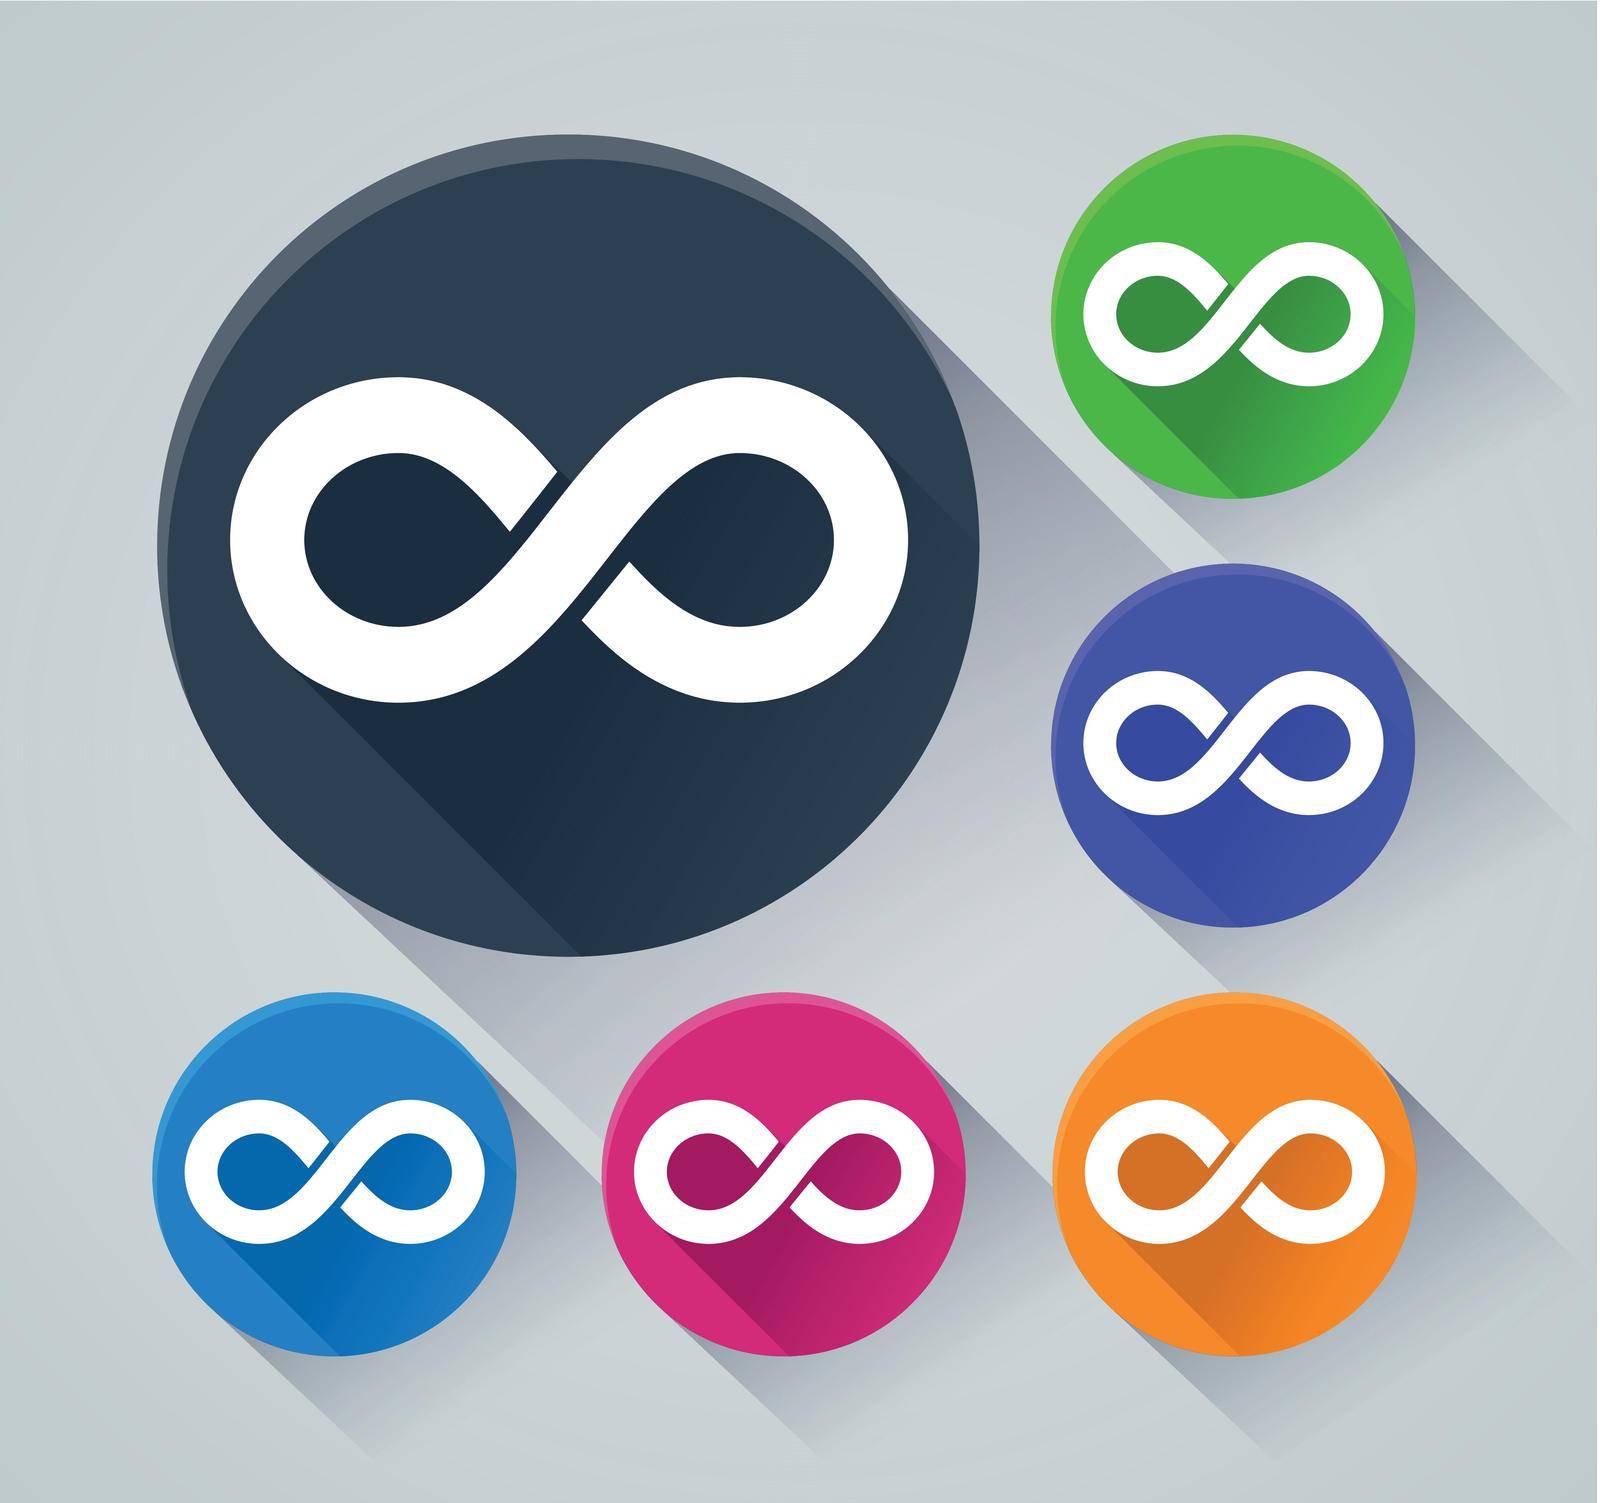 infinity circle icons with shadow by Francois_Poirier